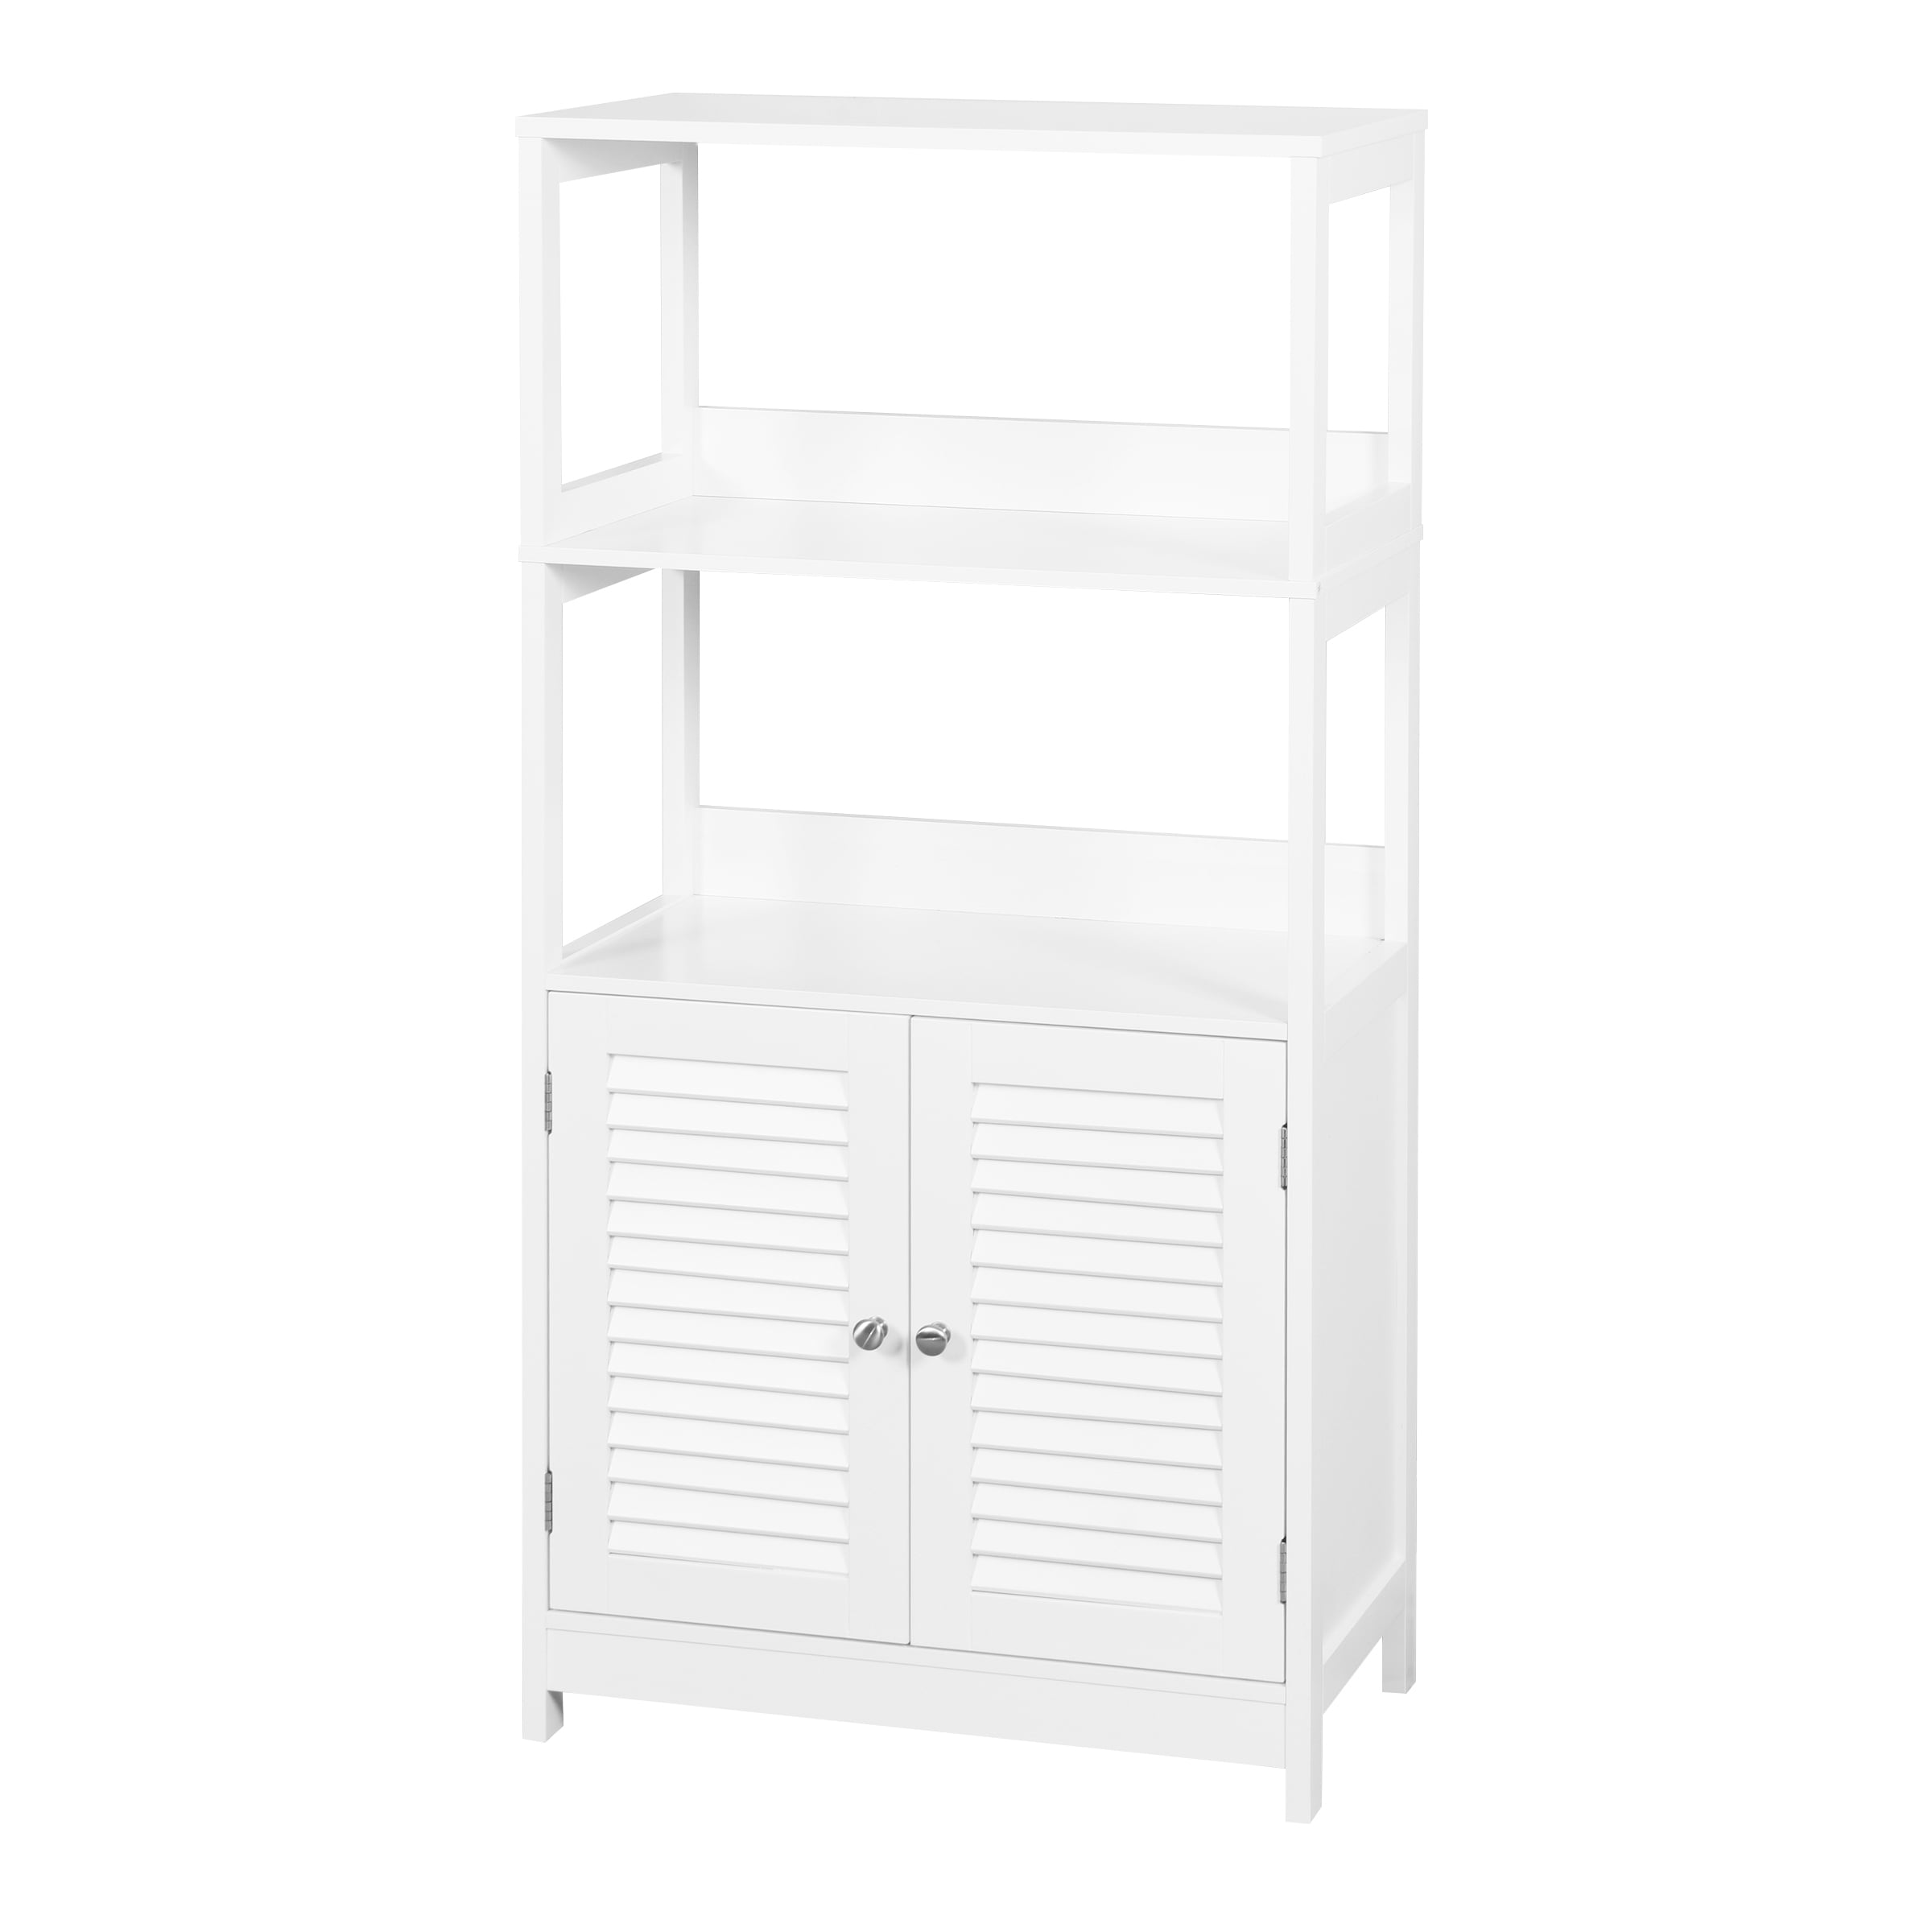 Bathroom Tall Cabinet - Freestanding Linen Tower Storage with 2 Open ...